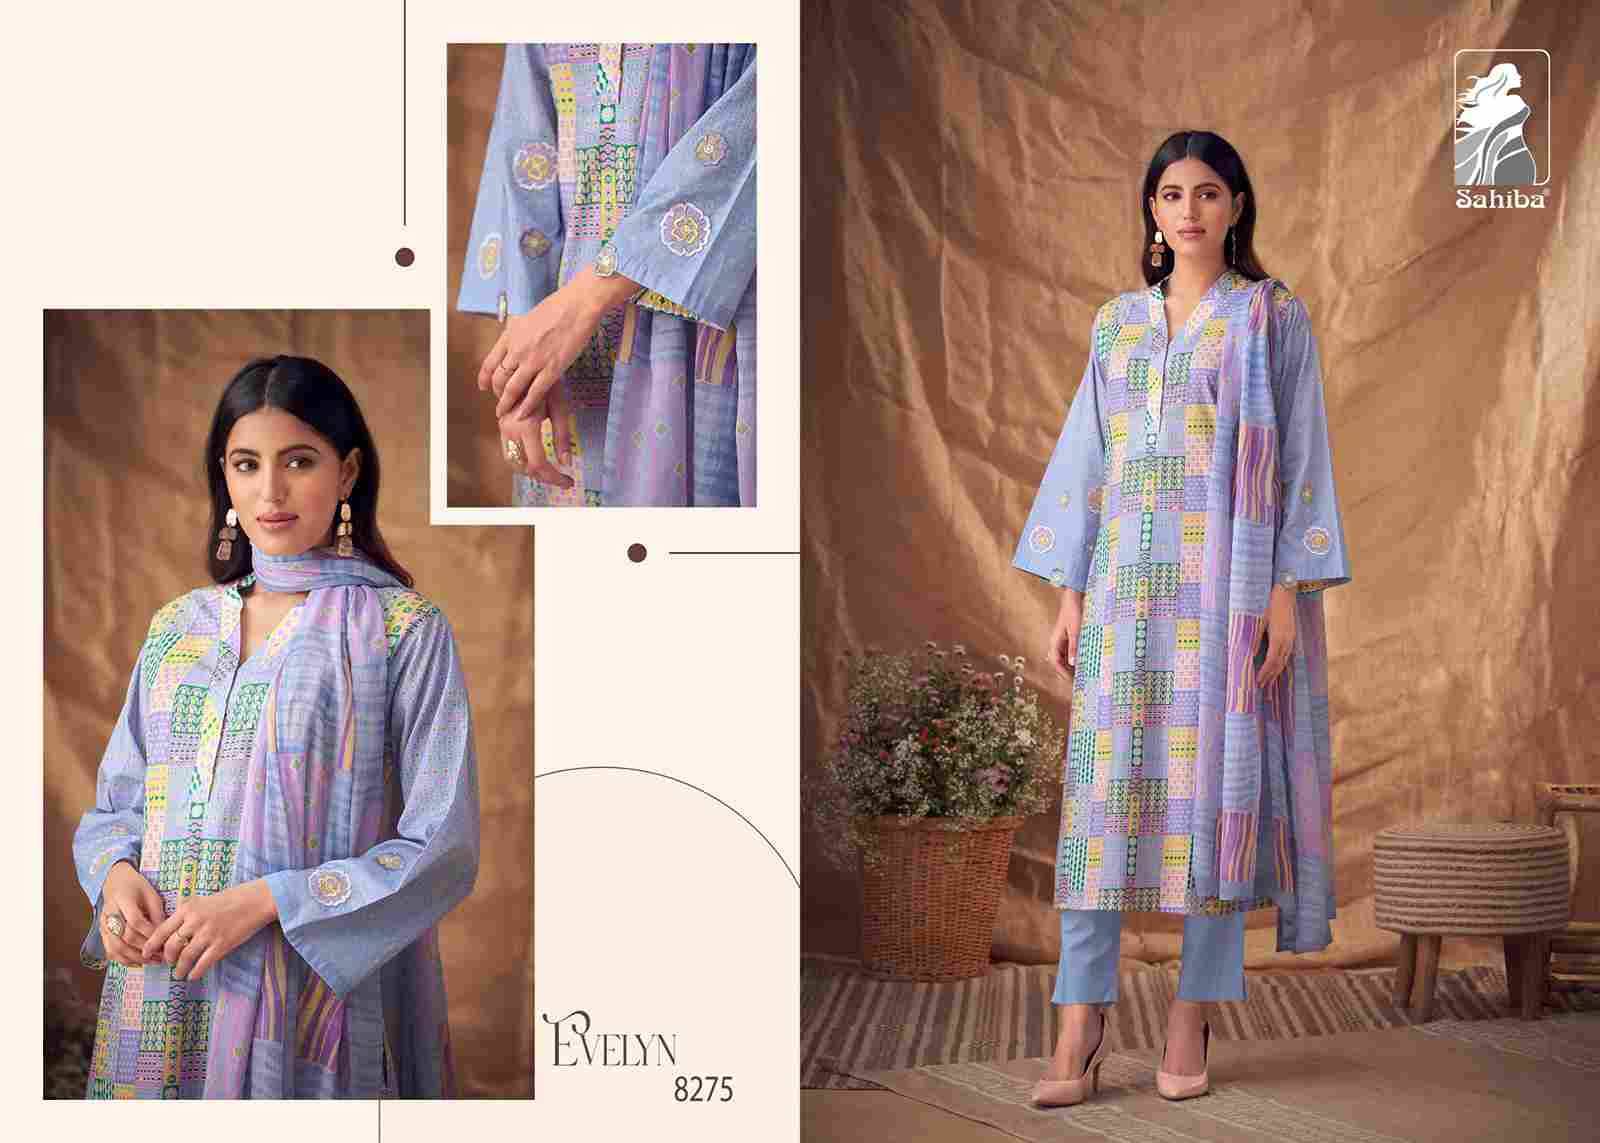 Evelyn By Sahiba Fabrics Beautiful Festive Suits Colorful Stylish Fancy Casual Wear & Ethnic Wear Pure Cotton Lawn Dresses At Wholesale Price